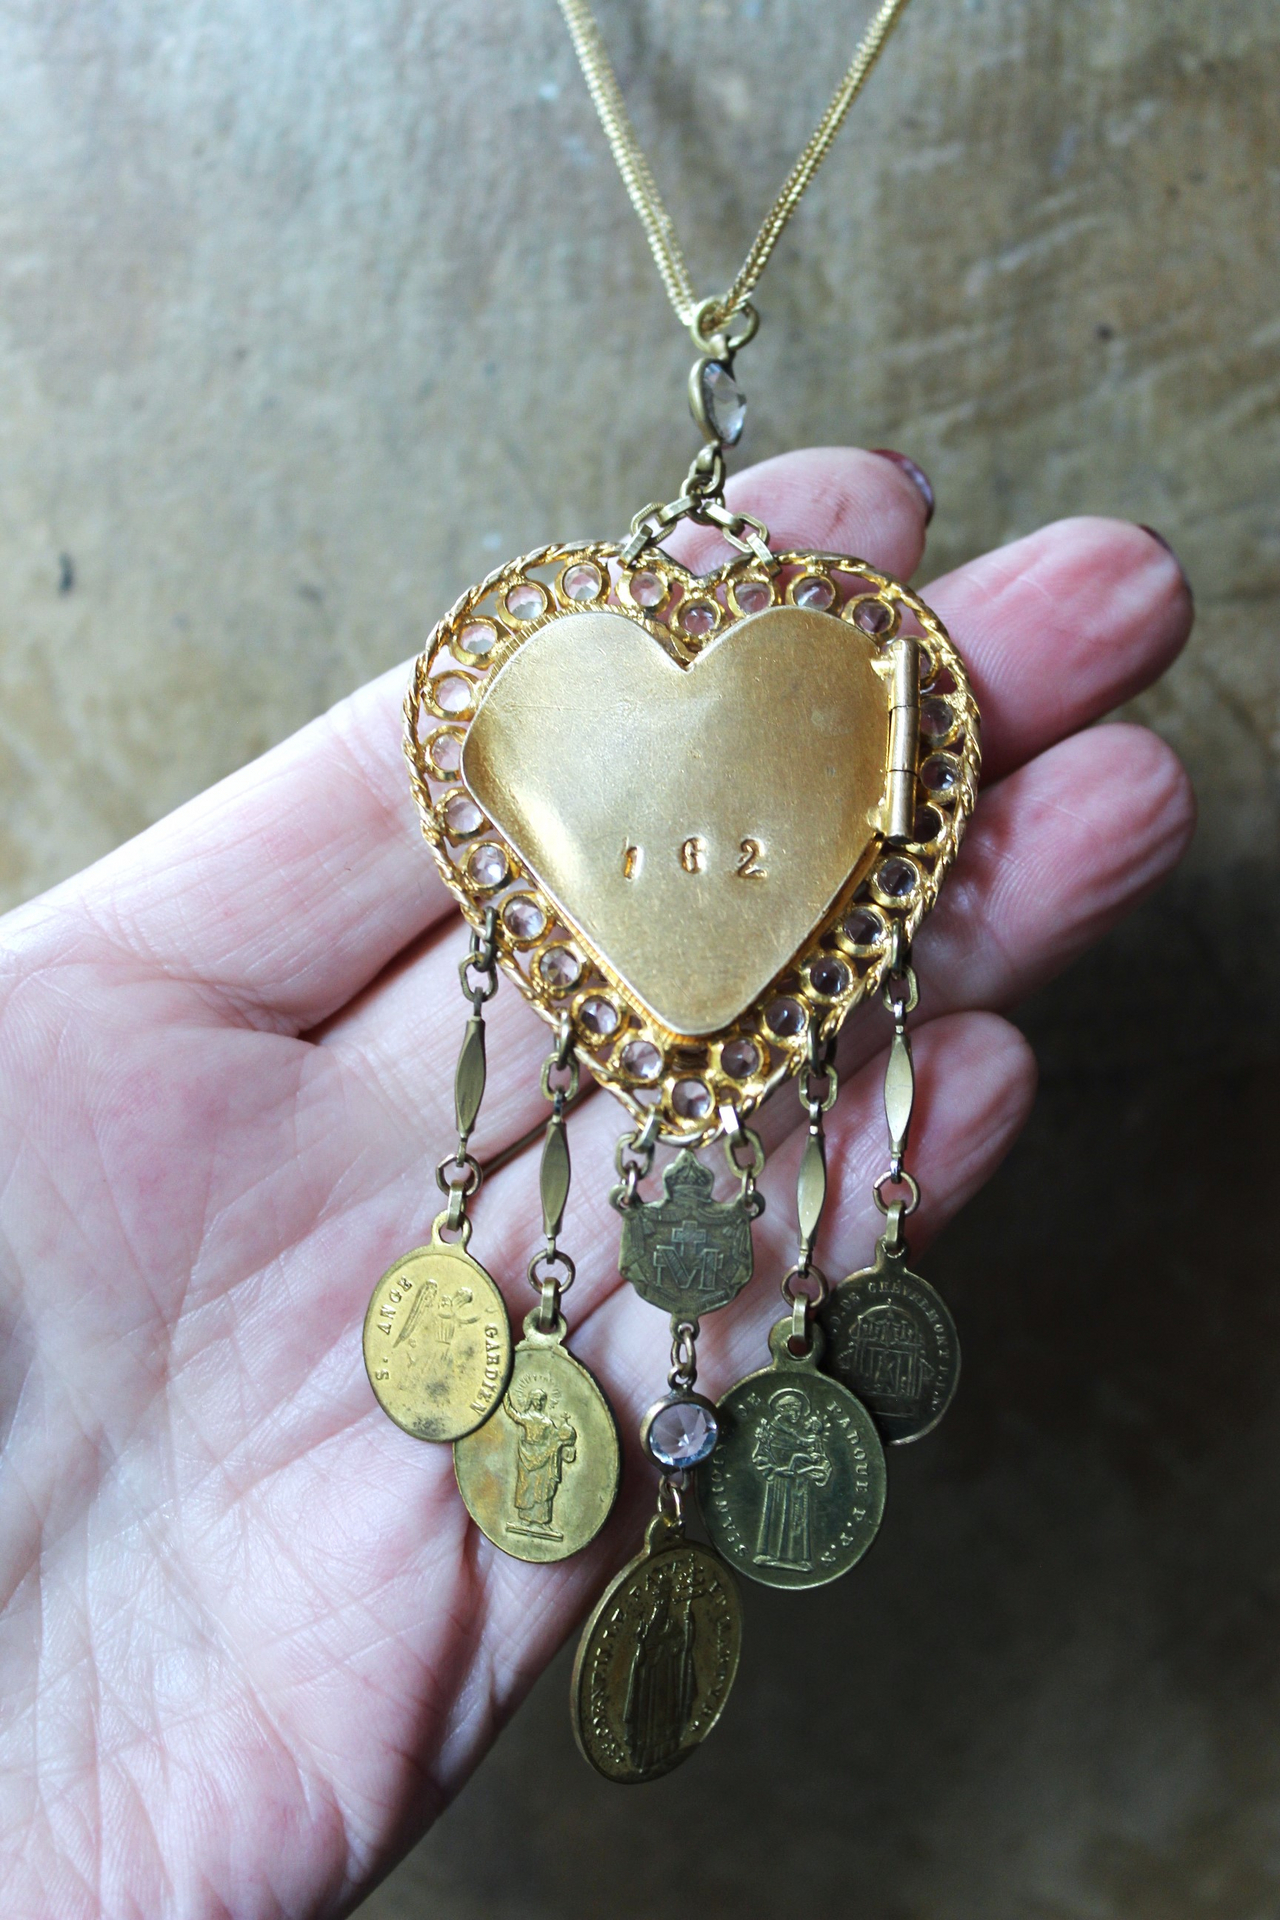 NEW! Rare Antique French Ex Voto Rhinestone Locket Necklace with Antique French Medals,Sterling Vermeil Foxtail Chain and 14K Gold Clasp